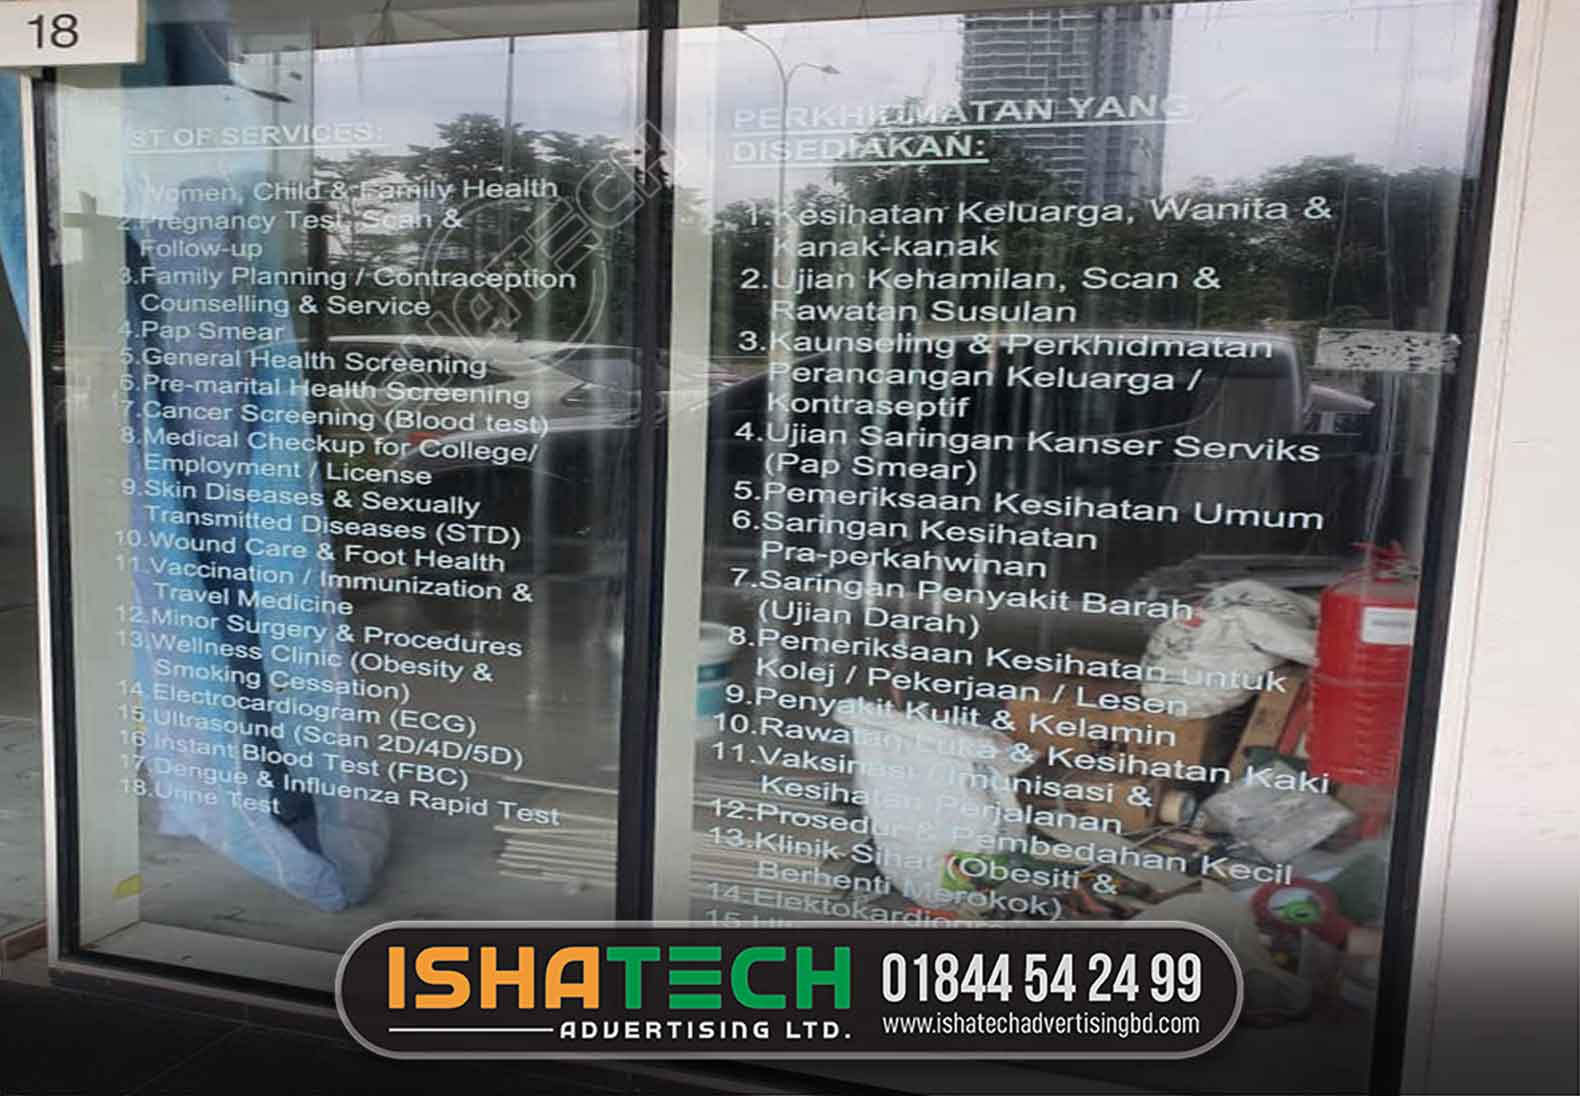 Ishatech Advertising is your primary destination for superb frosted acrylic glass services, specializing in the artful embellishment of places through the appeal of frosted acrylic glass. With meticulous application methods, our knowledgeable staff ensures flawless operation in each installation of frosted acrylic glass, bringing creations to life. Experience the adaptability of our frosted acrylic for glass; every pattern has been carefully chosen to go with a variety of tastes and styles. You can rely on us to provide you with unmatched frosted acrylic glass services that perfectly balance privacy and style to improve the environment around you.